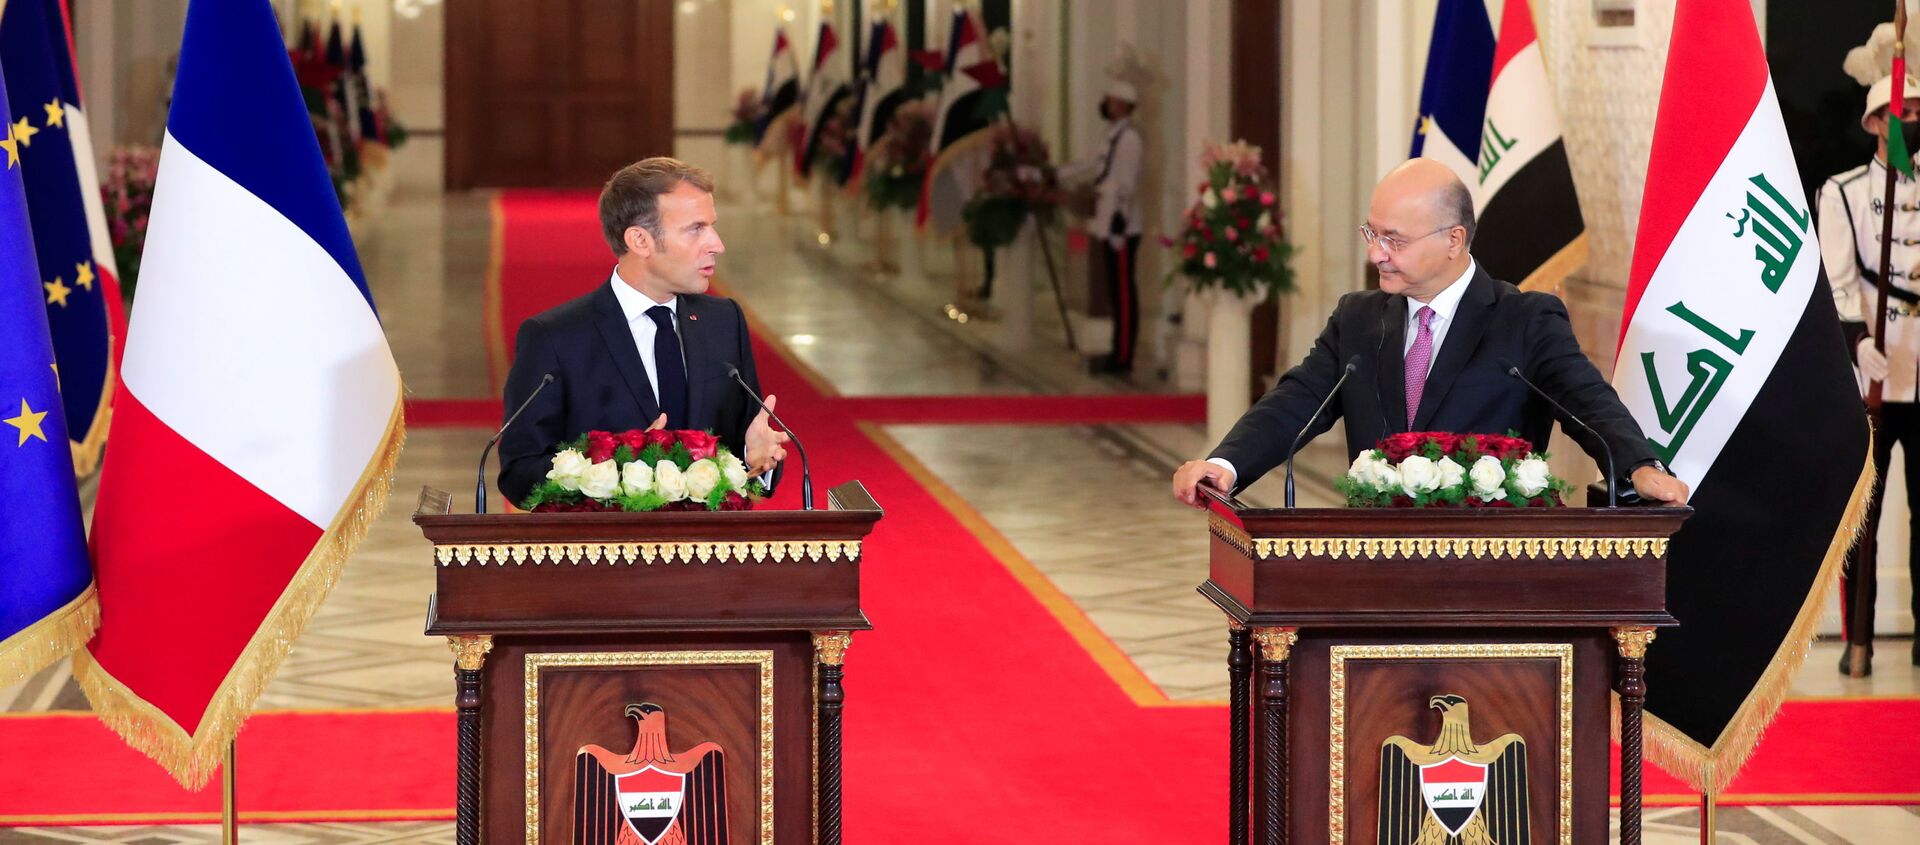 Iraq's President Barham Salih and France's President Emmanuel Macron attend a news conference ahead of the Baghdad summit at the Green Zone in Baghdad, Iraq August 28, 2021 - Sputnik International, 1920, 28.08.2021